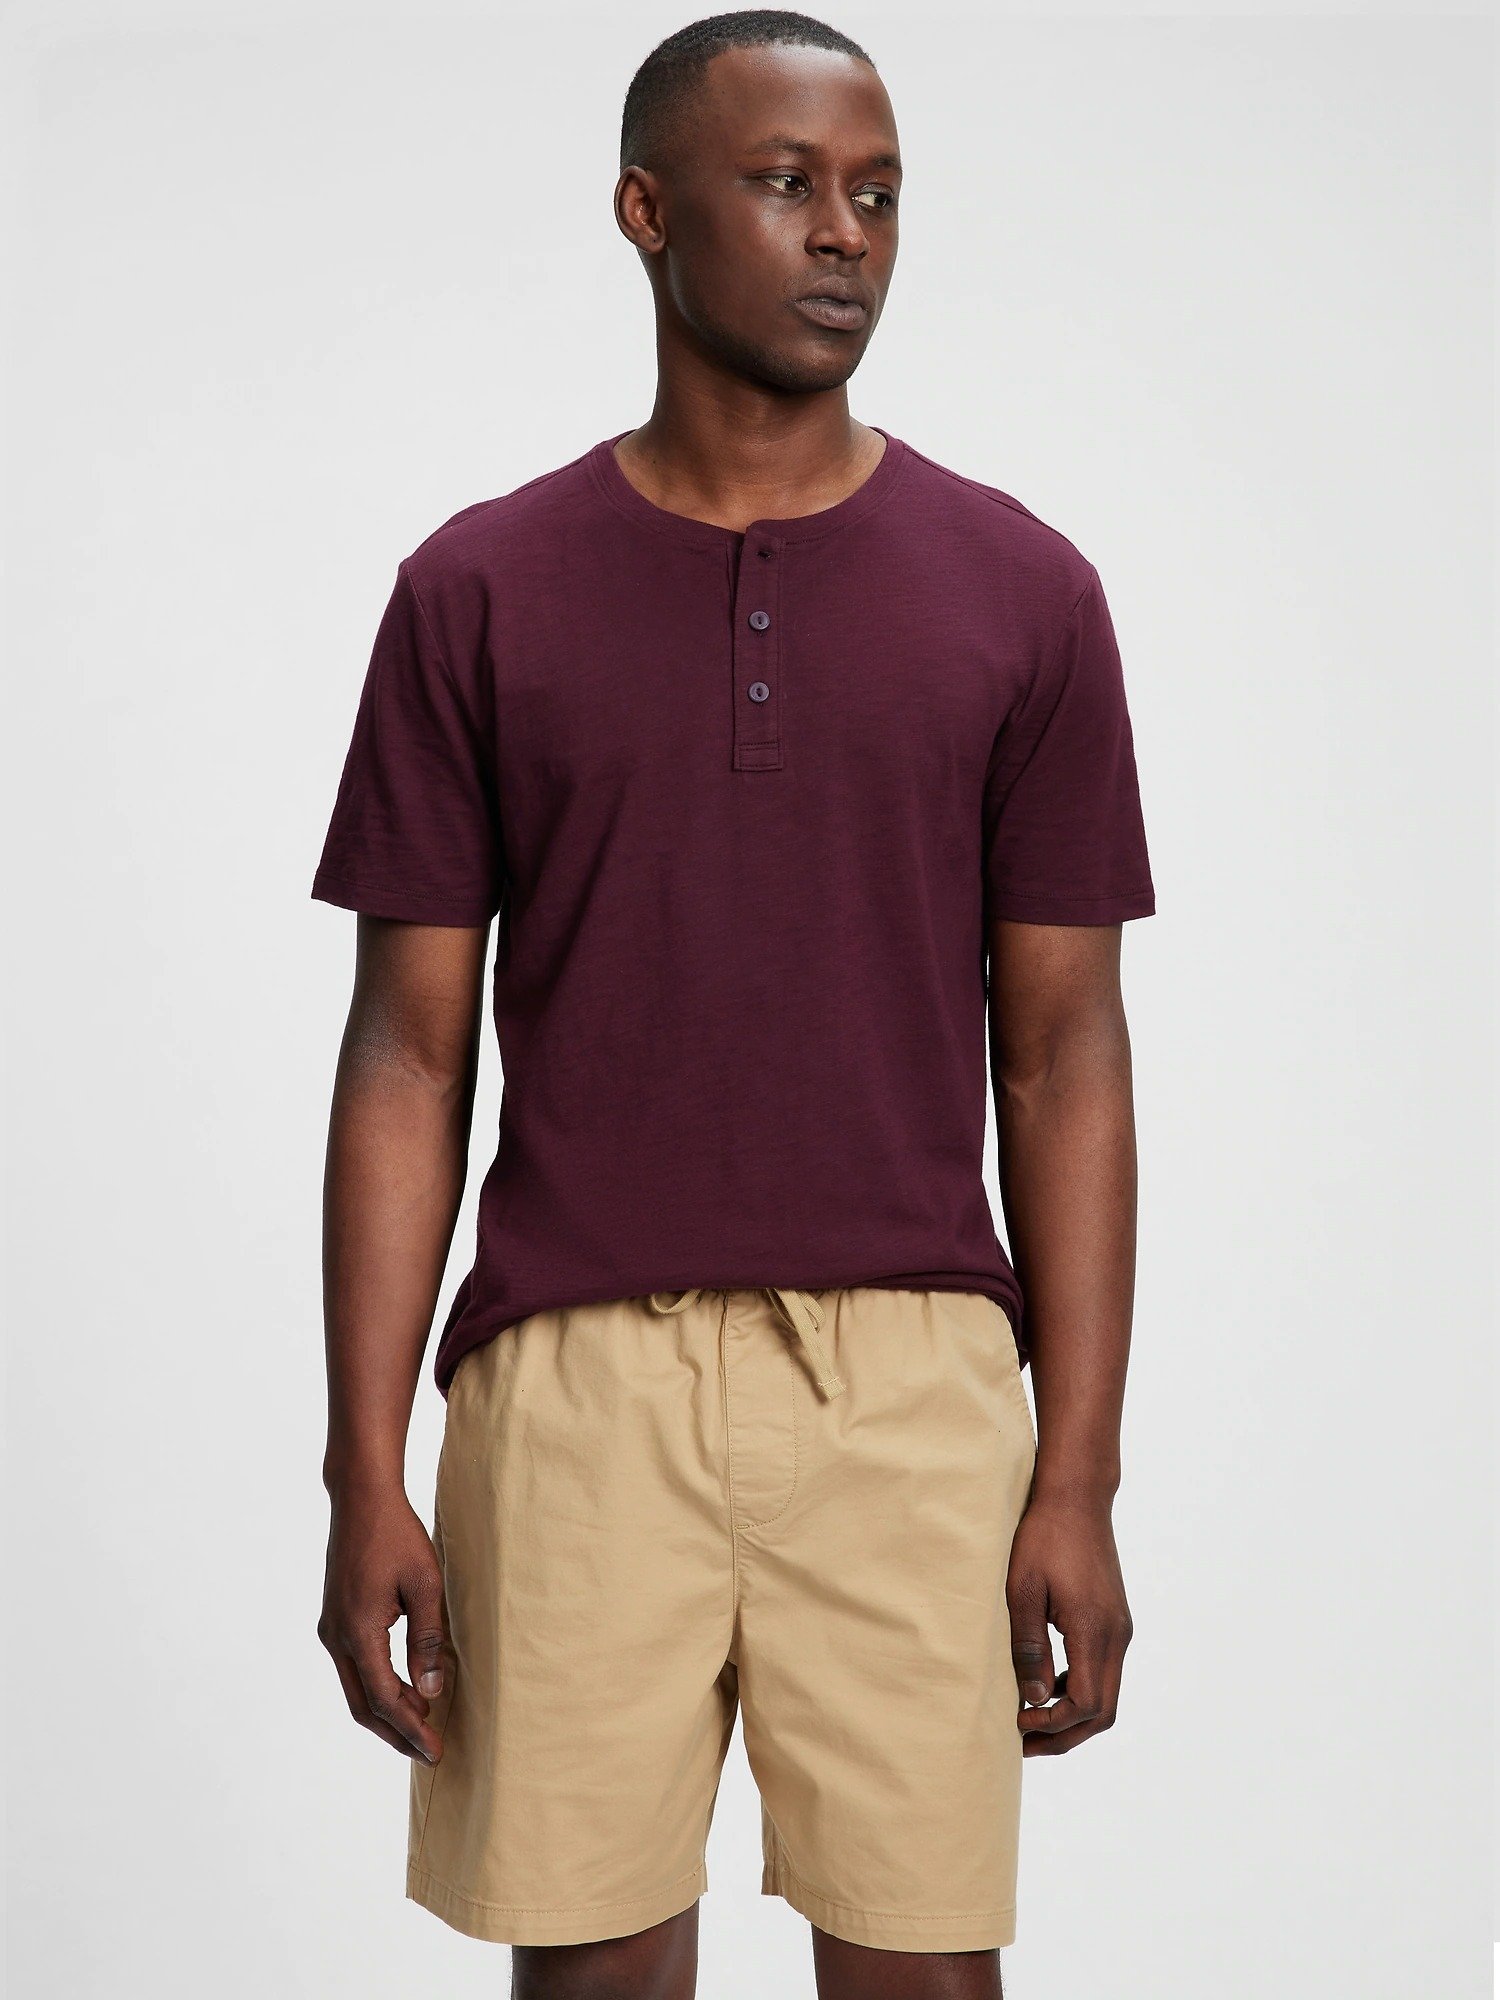 Henley T-Shirt product image